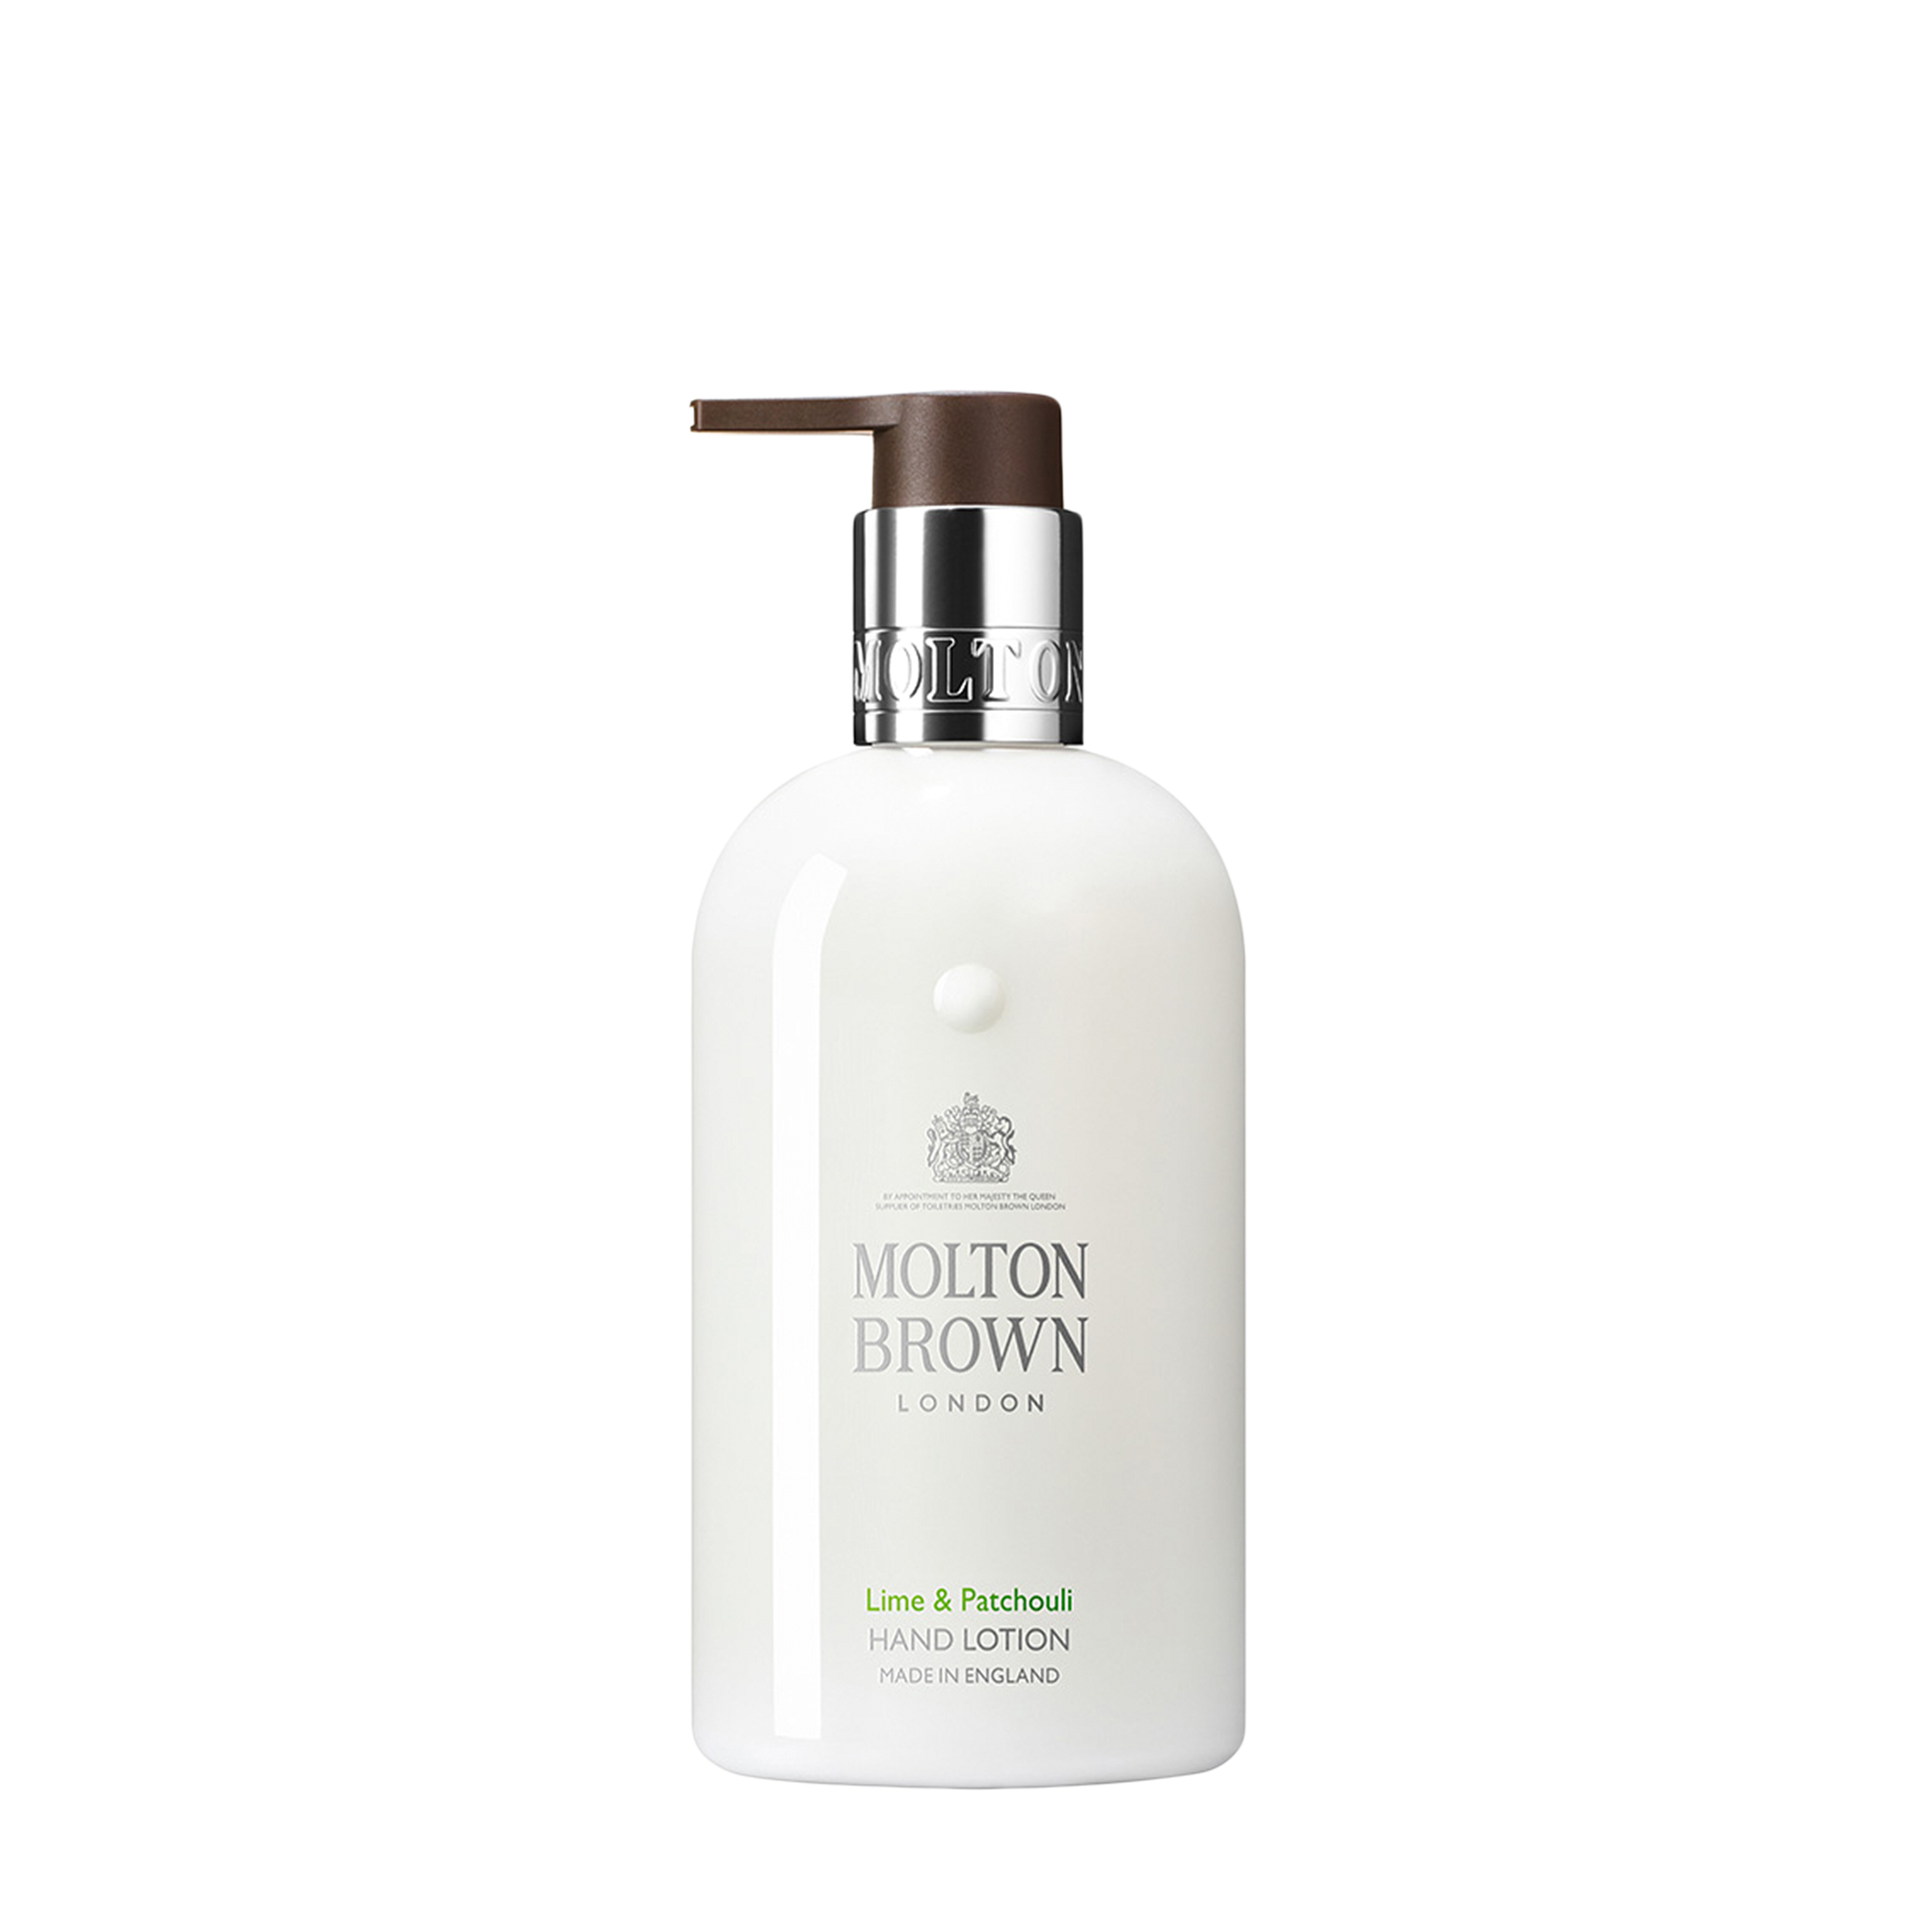 Molton Brown Molton Brown Лосьон для рук Lime & Patchouli Hand Lotion 300 мл NHH016 Лосьон для рук Lime & Patchouli Hand Lotion 300 мл - фото 1